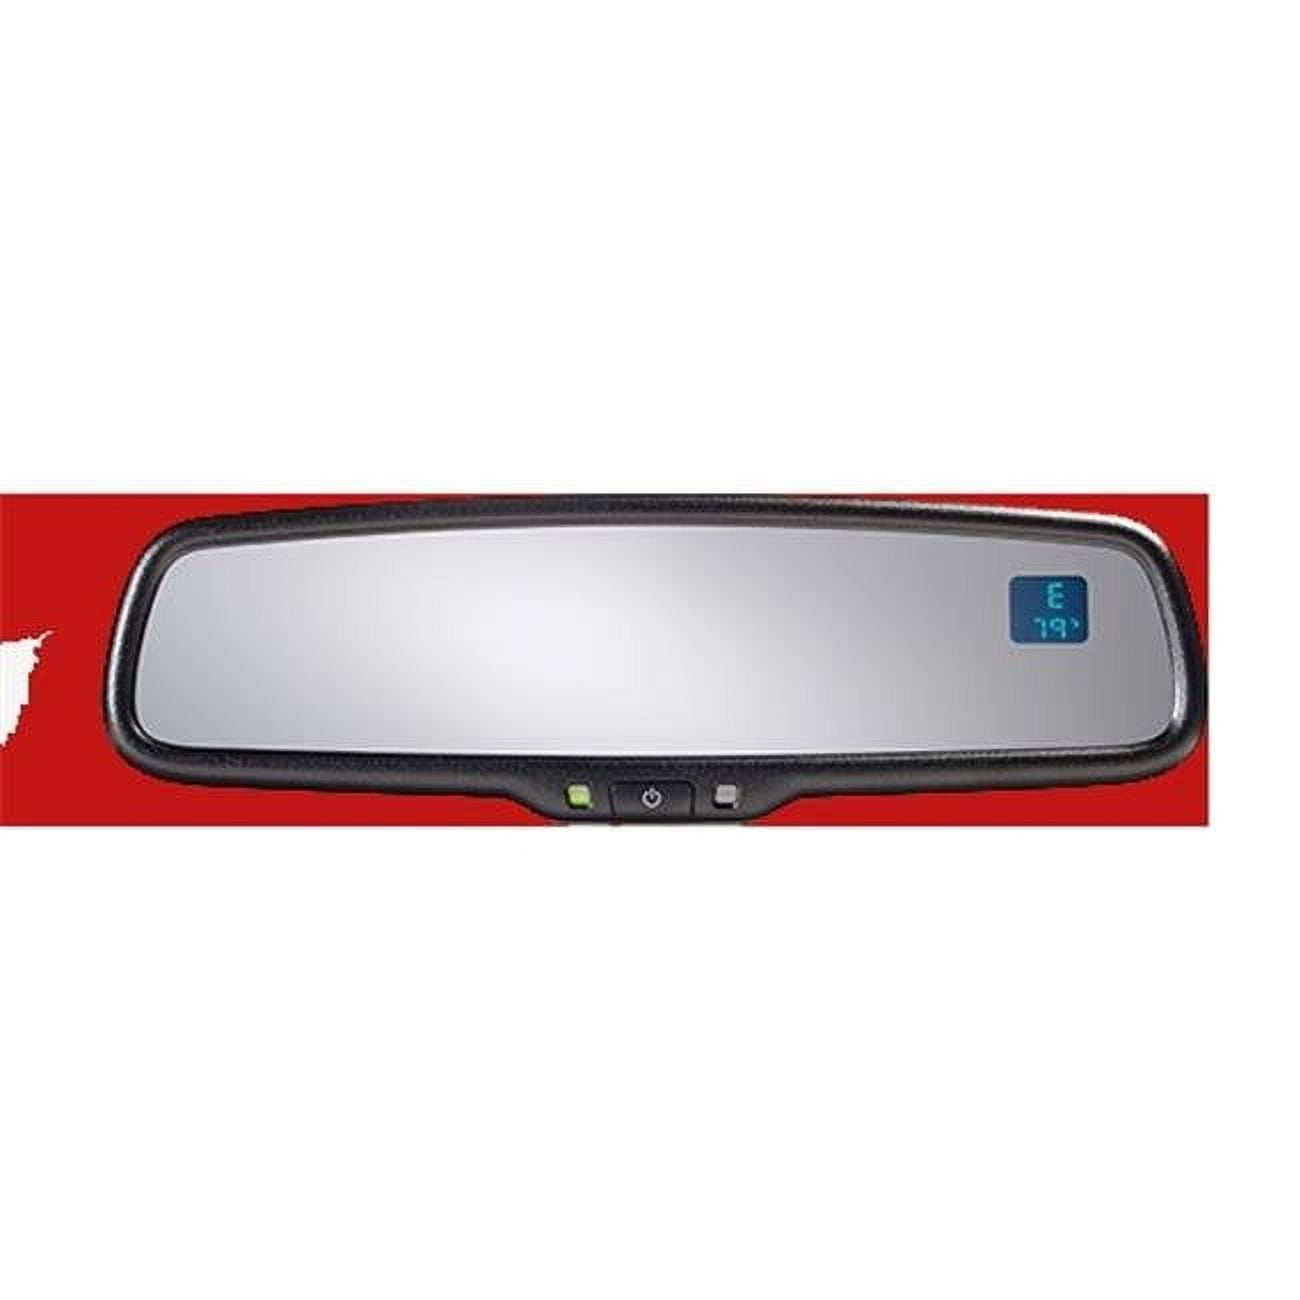 Subaru Auto Dimming Rear View Mirror With Compass And Homelink